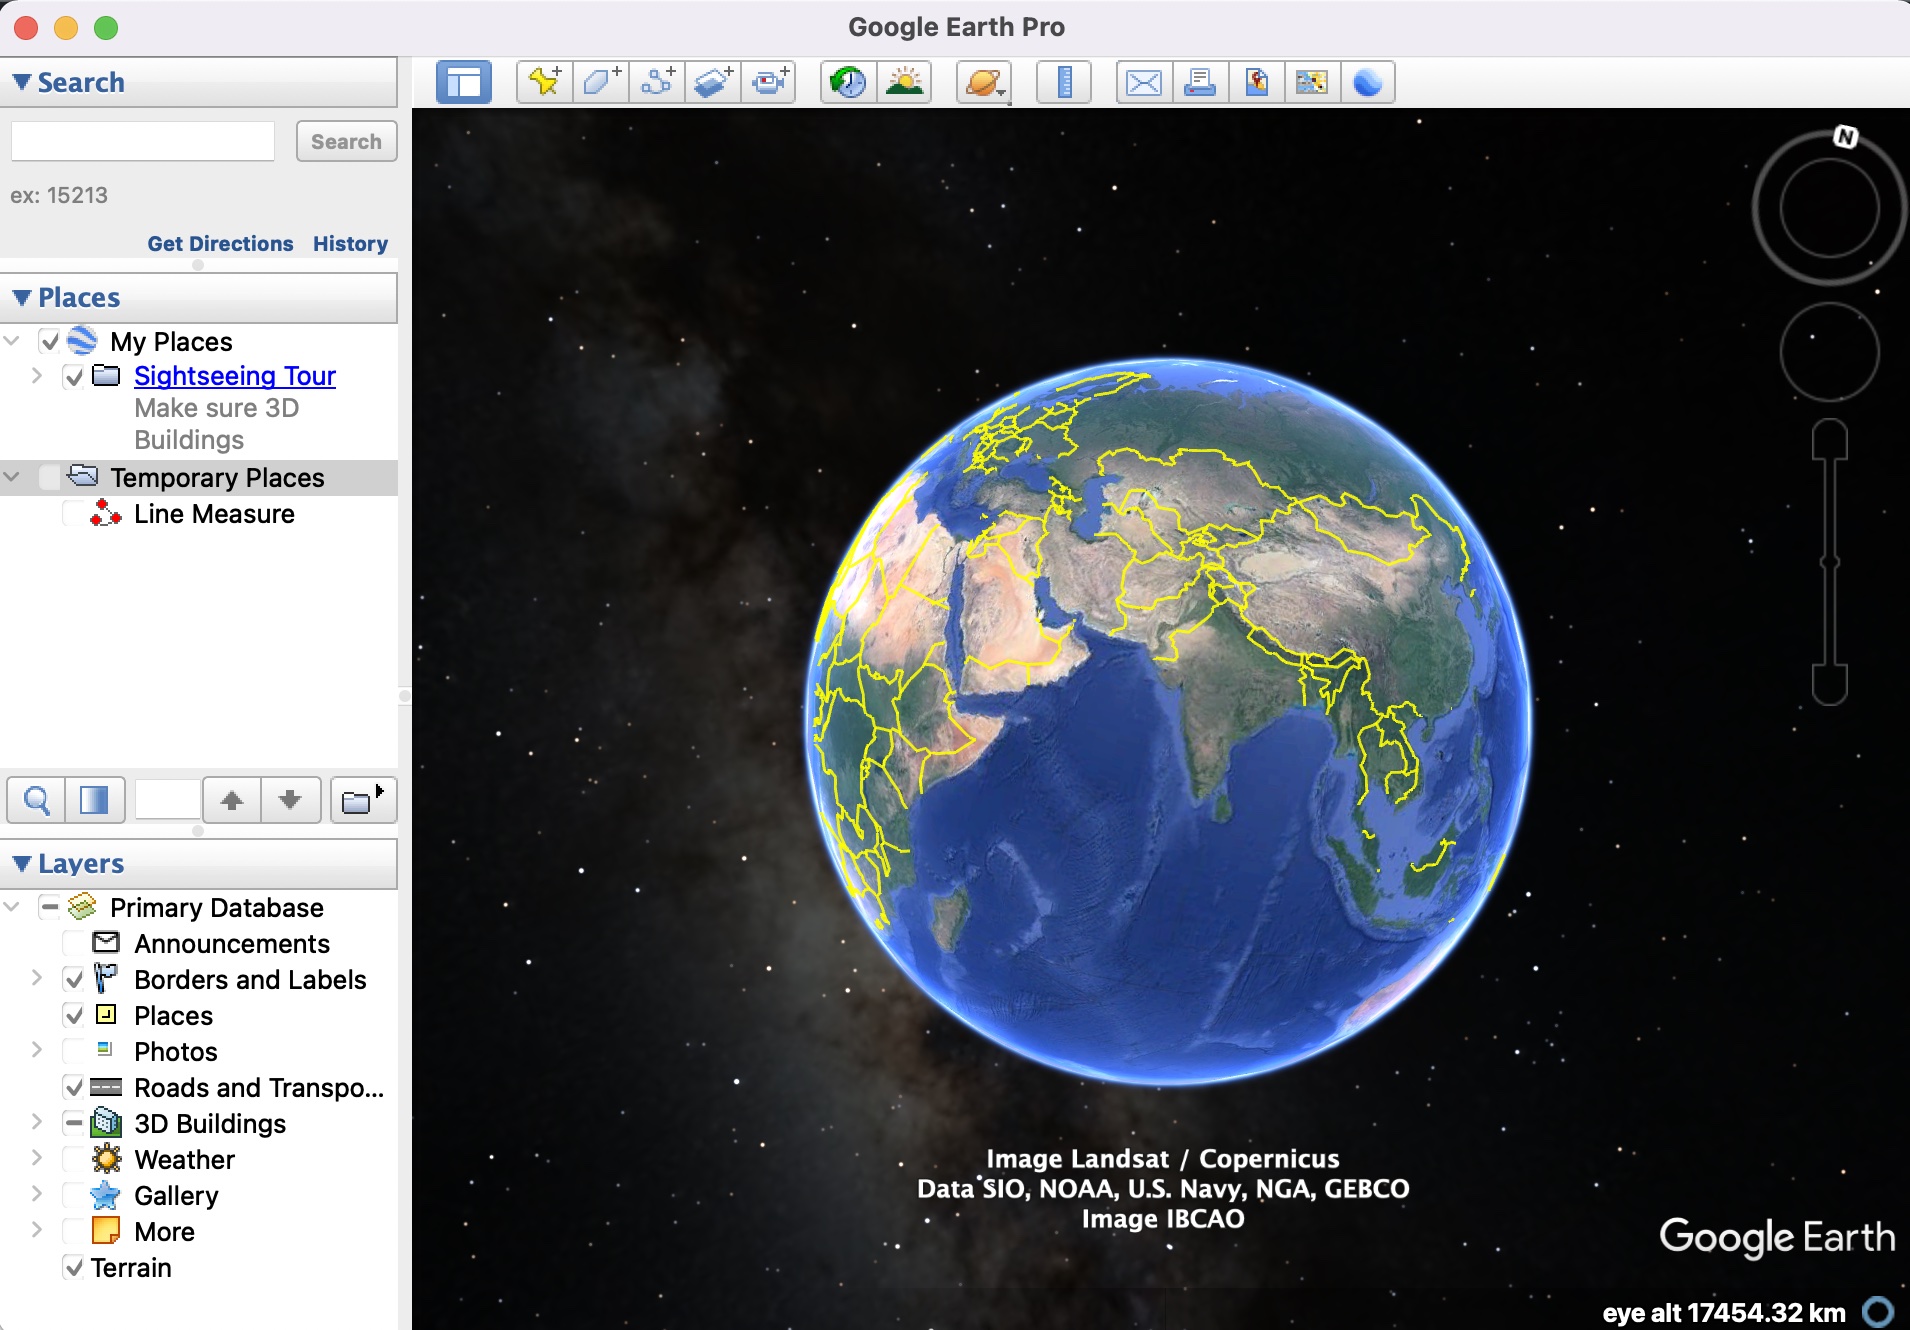 How to view Historical Maps on Google Earth